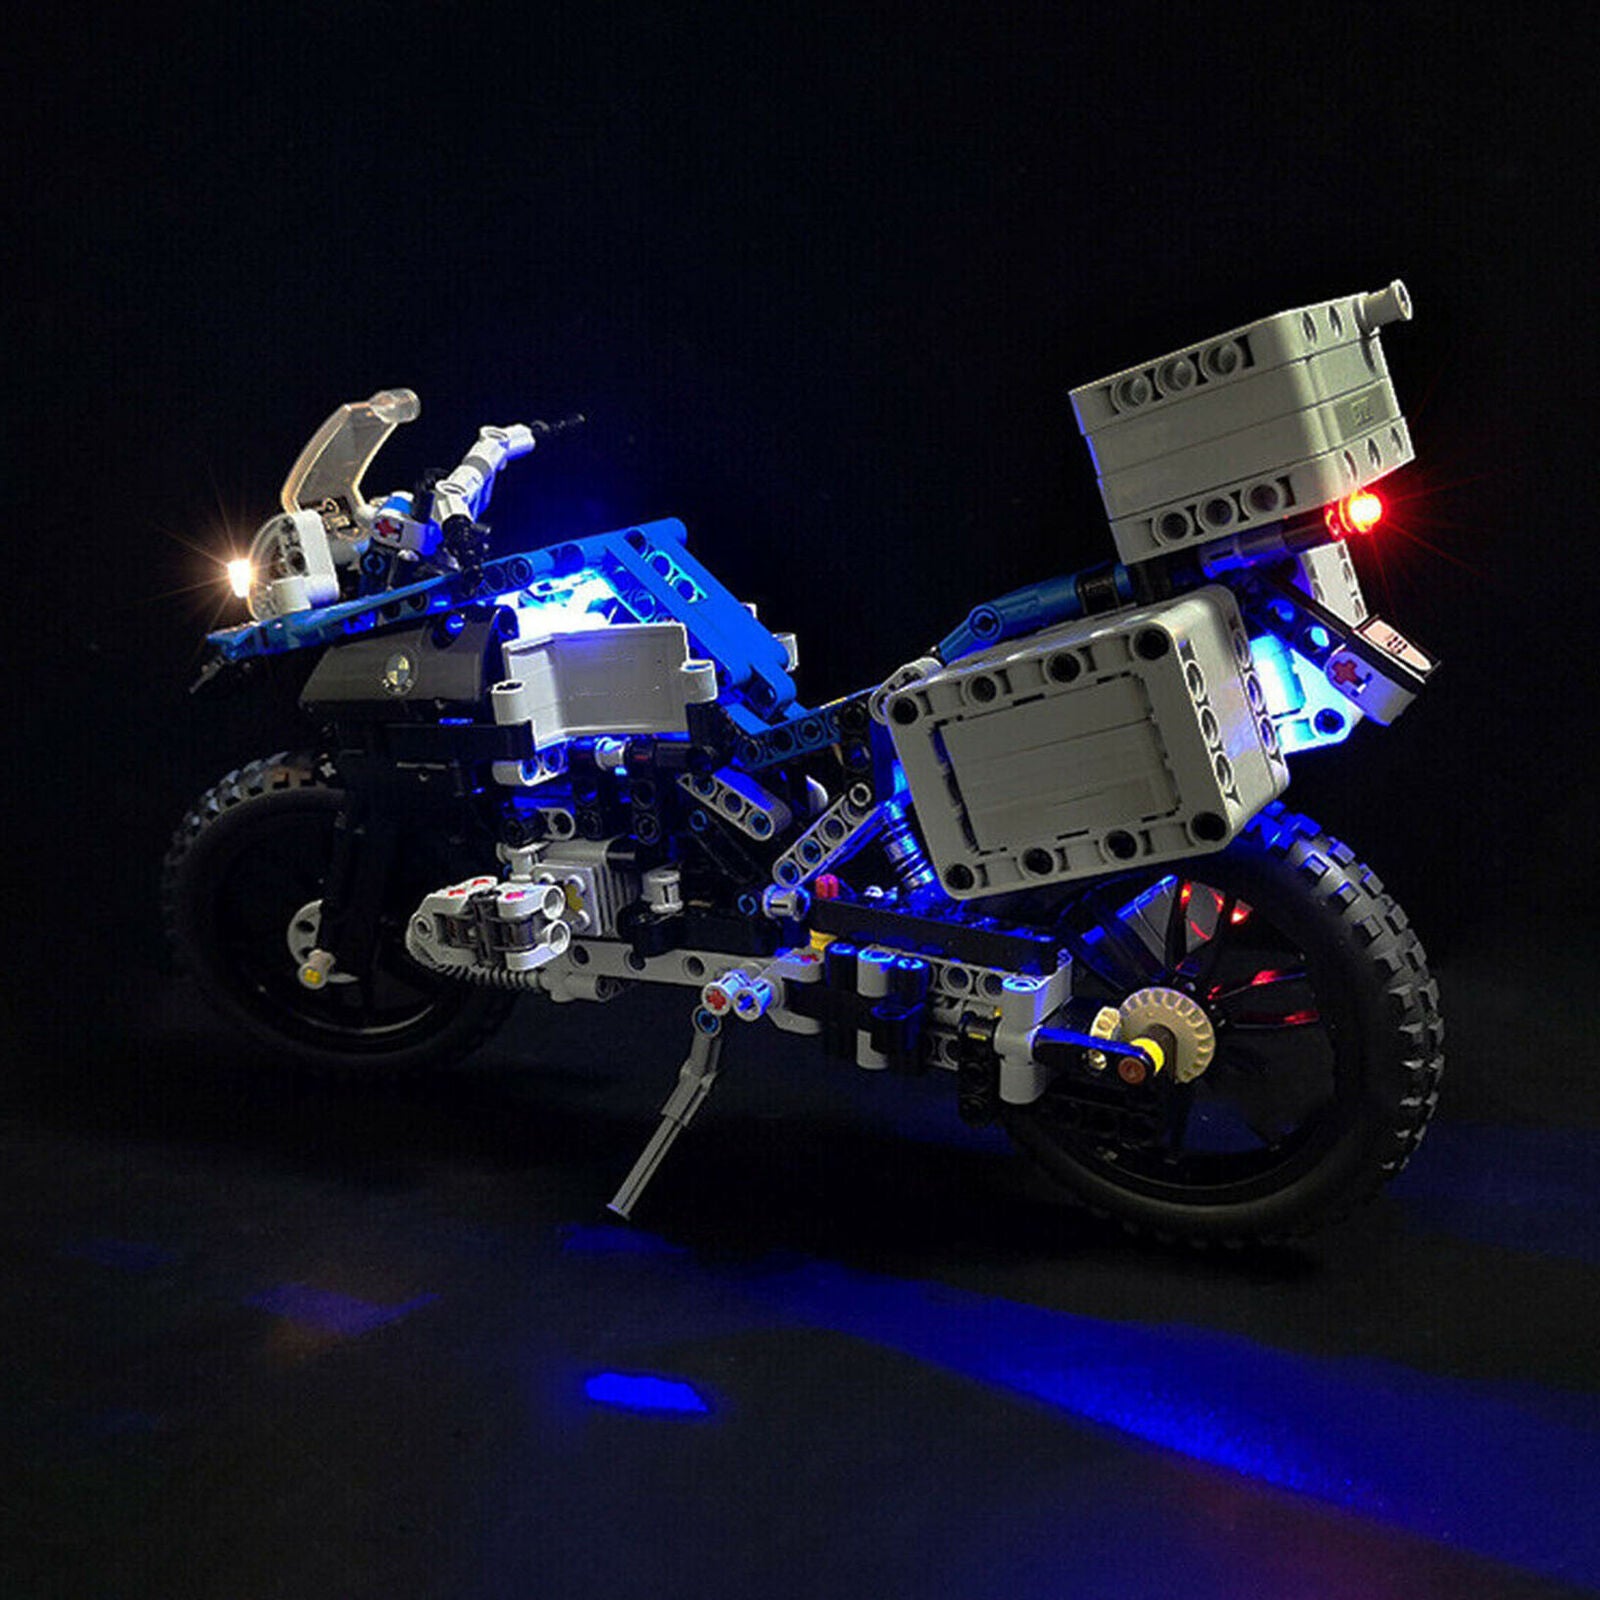 LED Light For LEGO 42063 For BMW R 1200 GS Adventure Technic Series